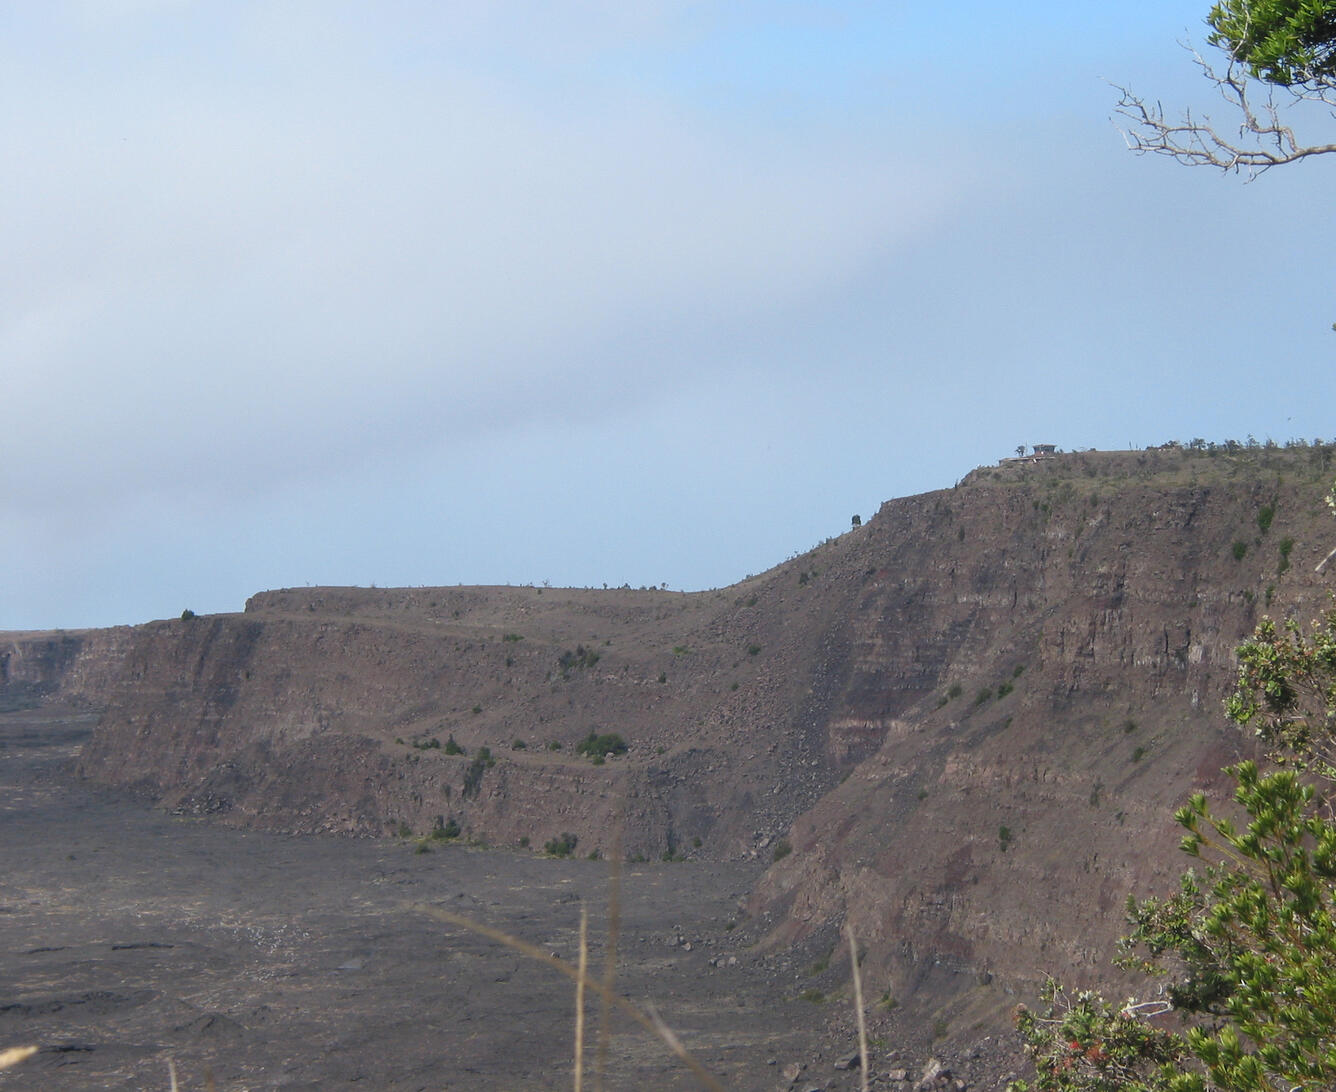 Clear day during tradewind conditions at the summit of Kīlauea Volc...